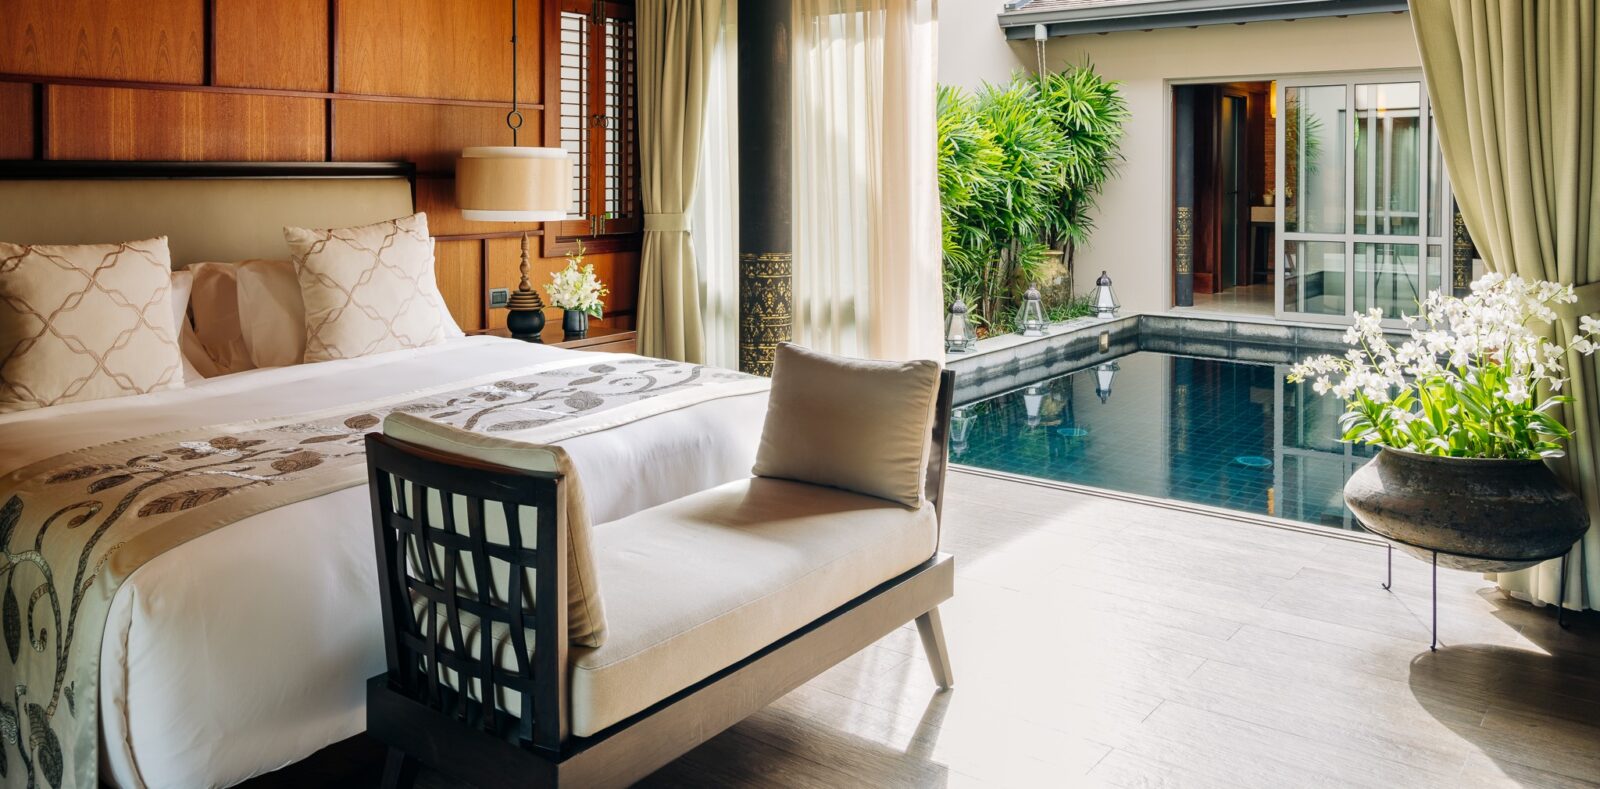 ANI Thailand – Accommodation – Pool Suite